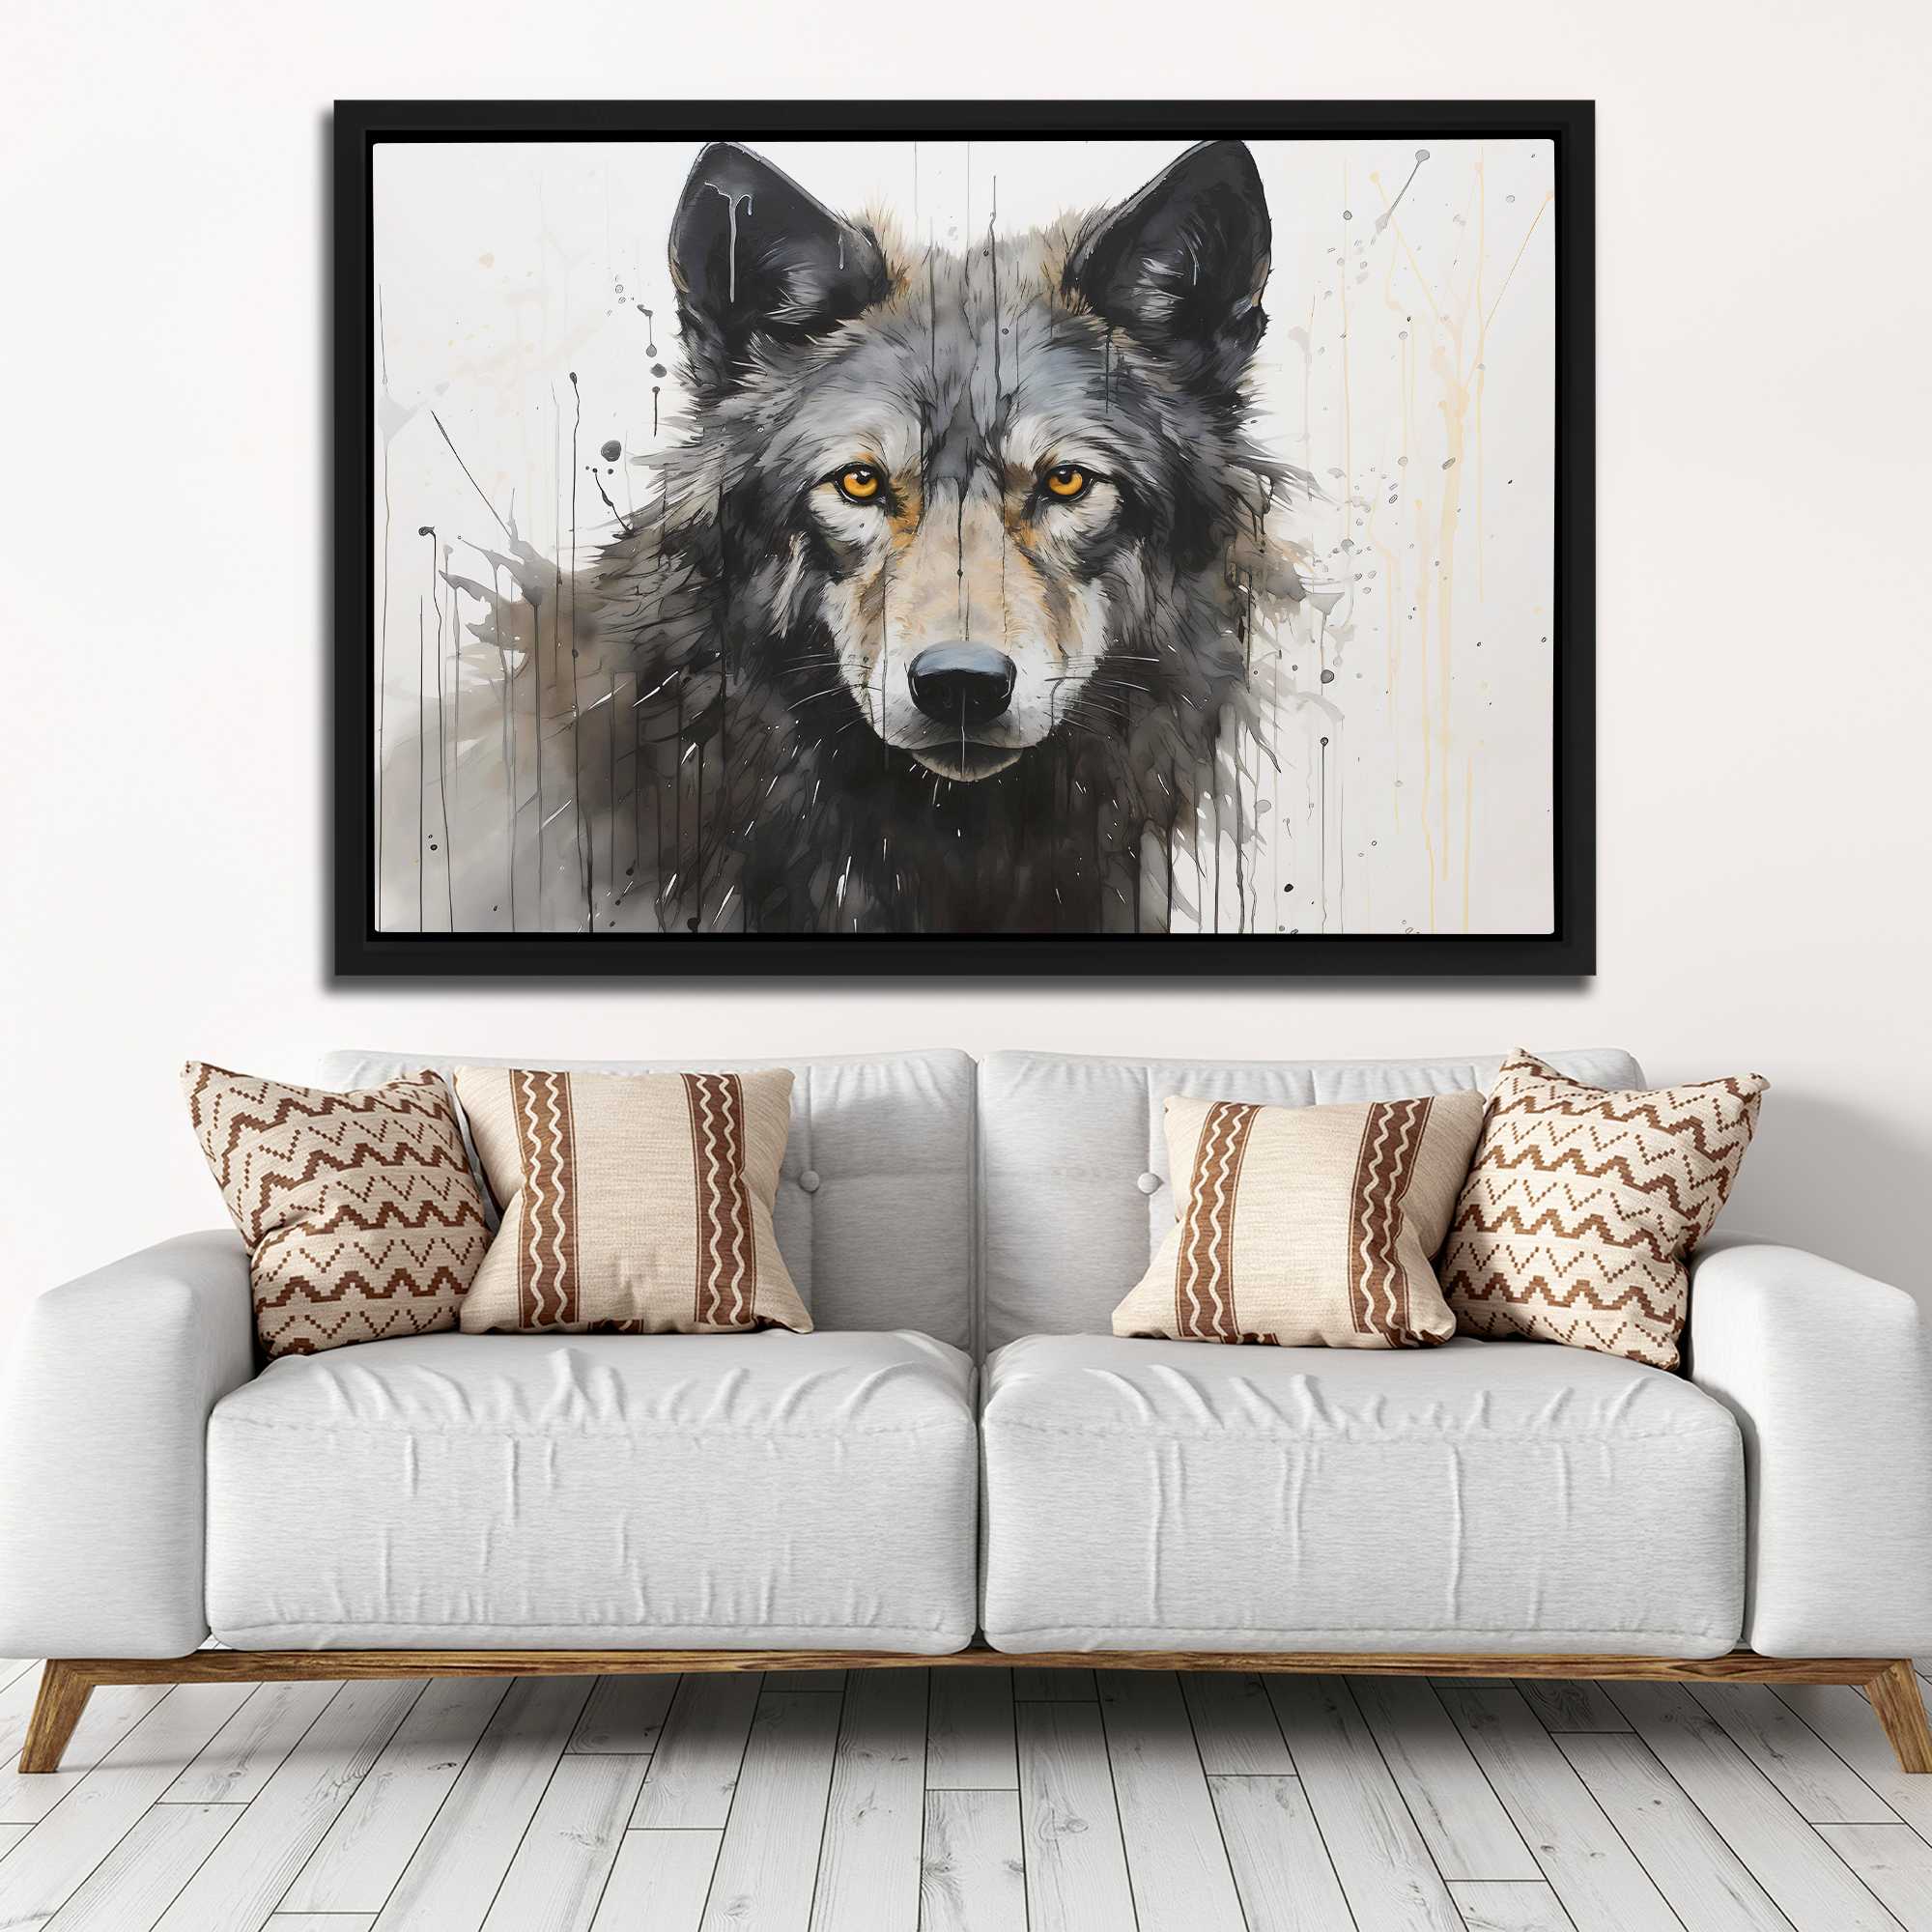 How Wolf Art Can revolutionize your living space - Luxury Wall Art